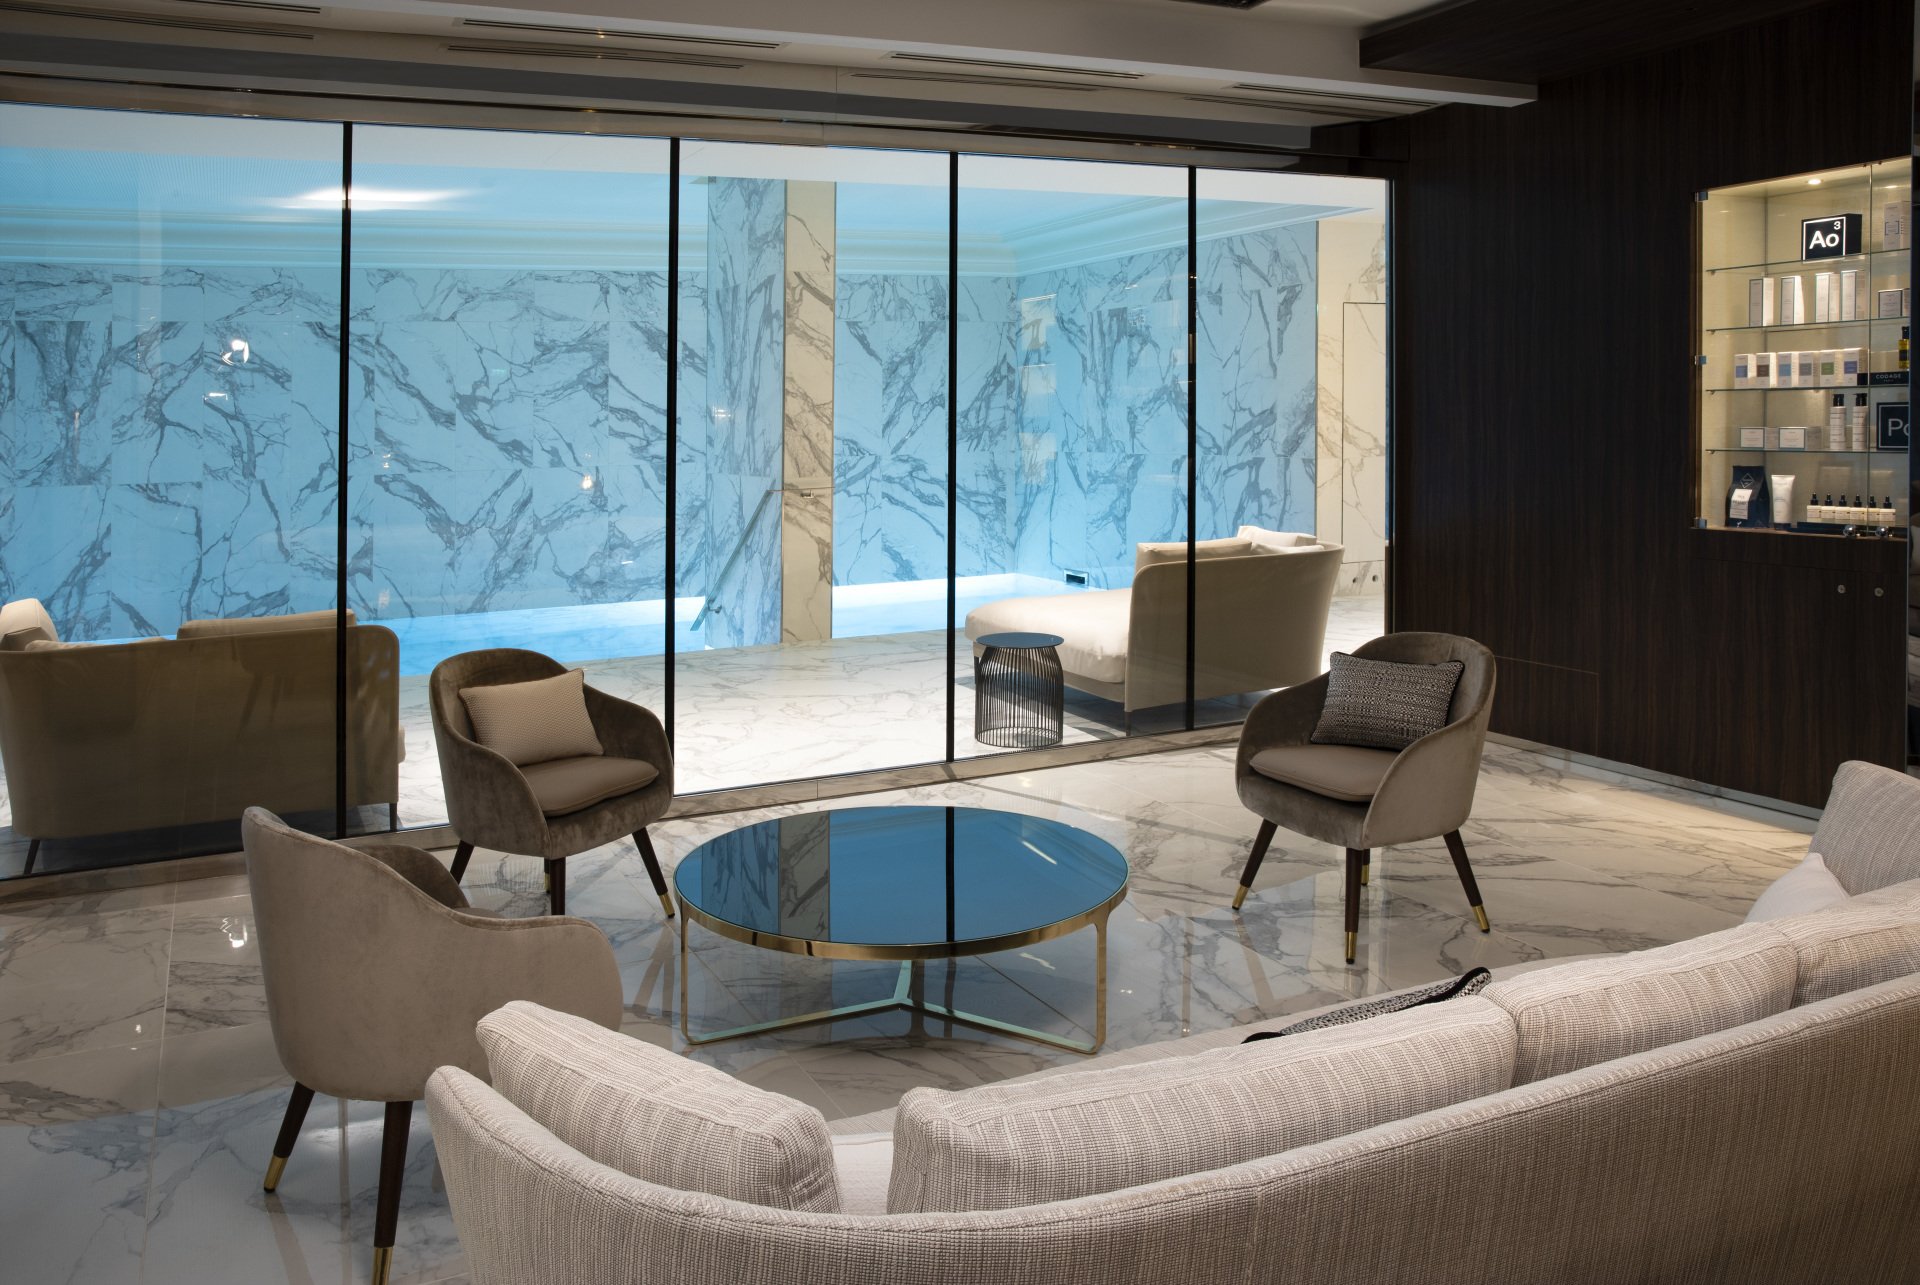 Hotel and Spa Le Damantin Paris designed by the interior design studio jean-philippe nuel - spa lounge, sofa, warm, welcoming, well-being, window, marble